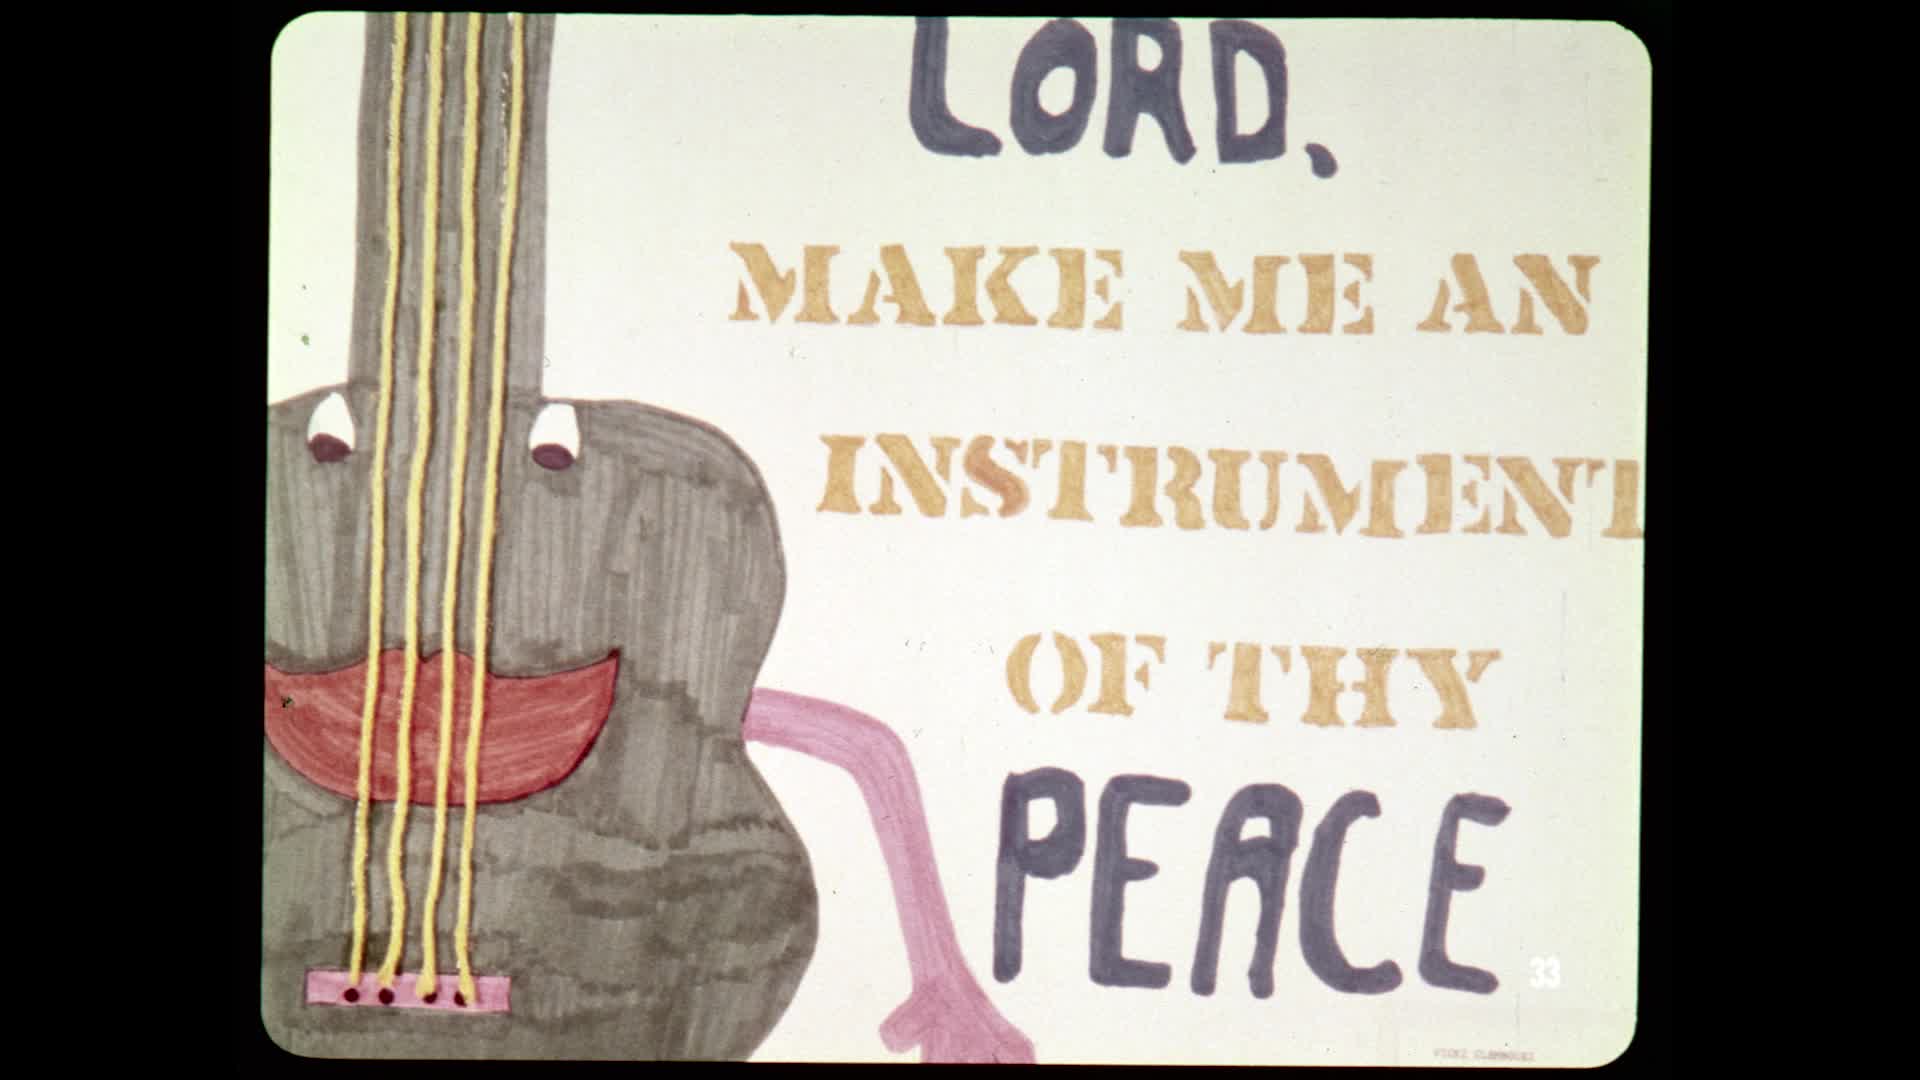 I hope they don't bomb my lily pad : peacemaking, a child's view, about 1982.